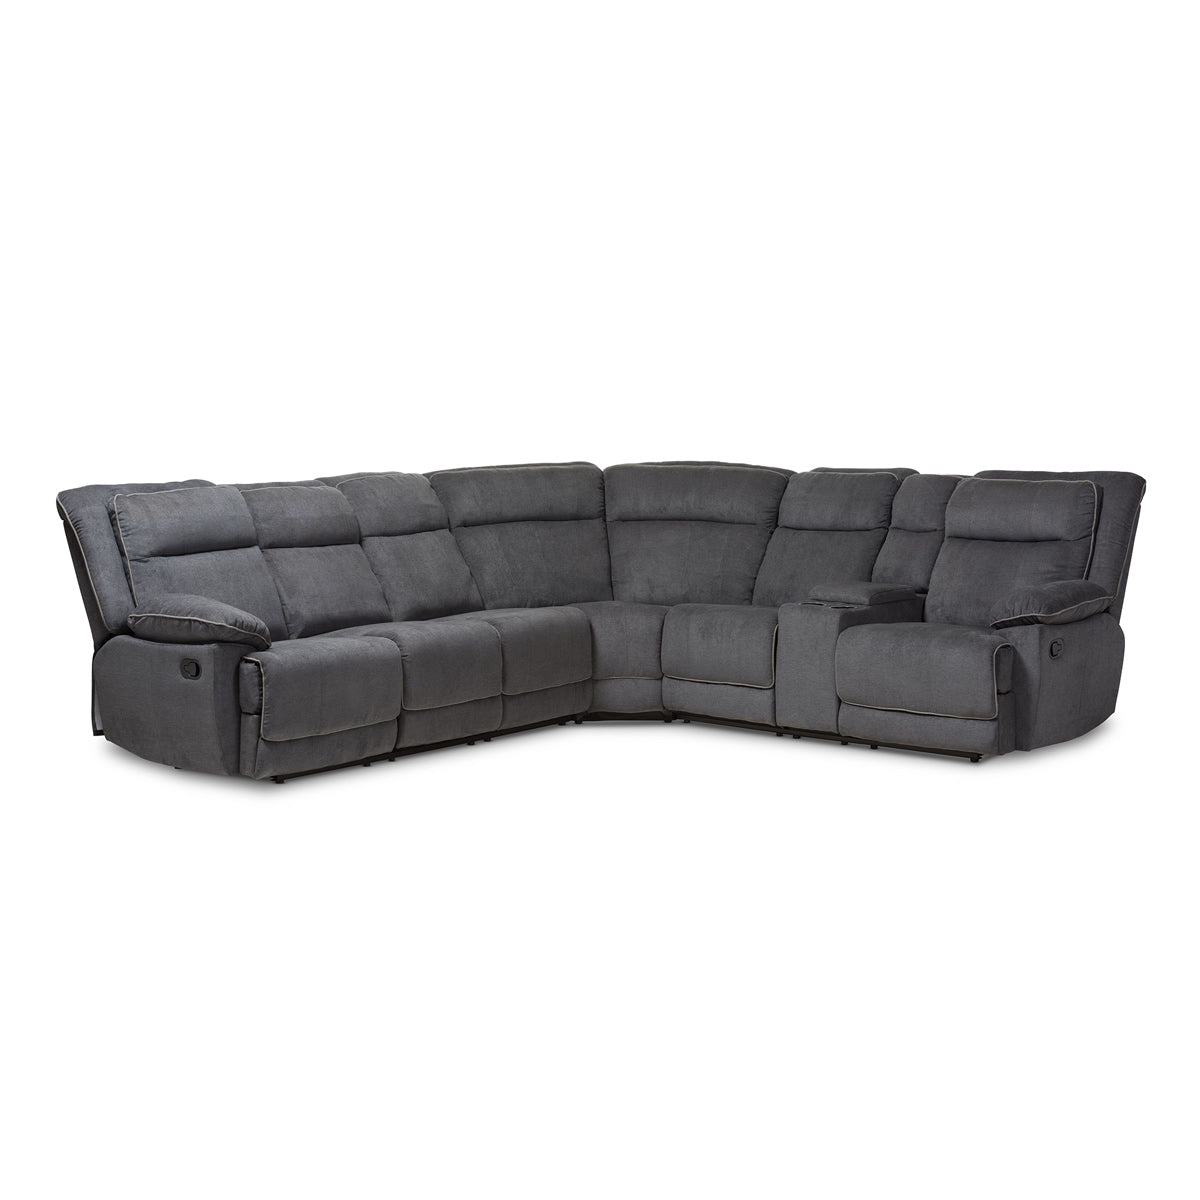 Baxton Studio Sabella Modern and Contemporary Dark Grey and Light Grey Two-Tone Fabric 7-Piece Reclining Sectional Baxton Studio-sofas-Minimal And Modern - 1